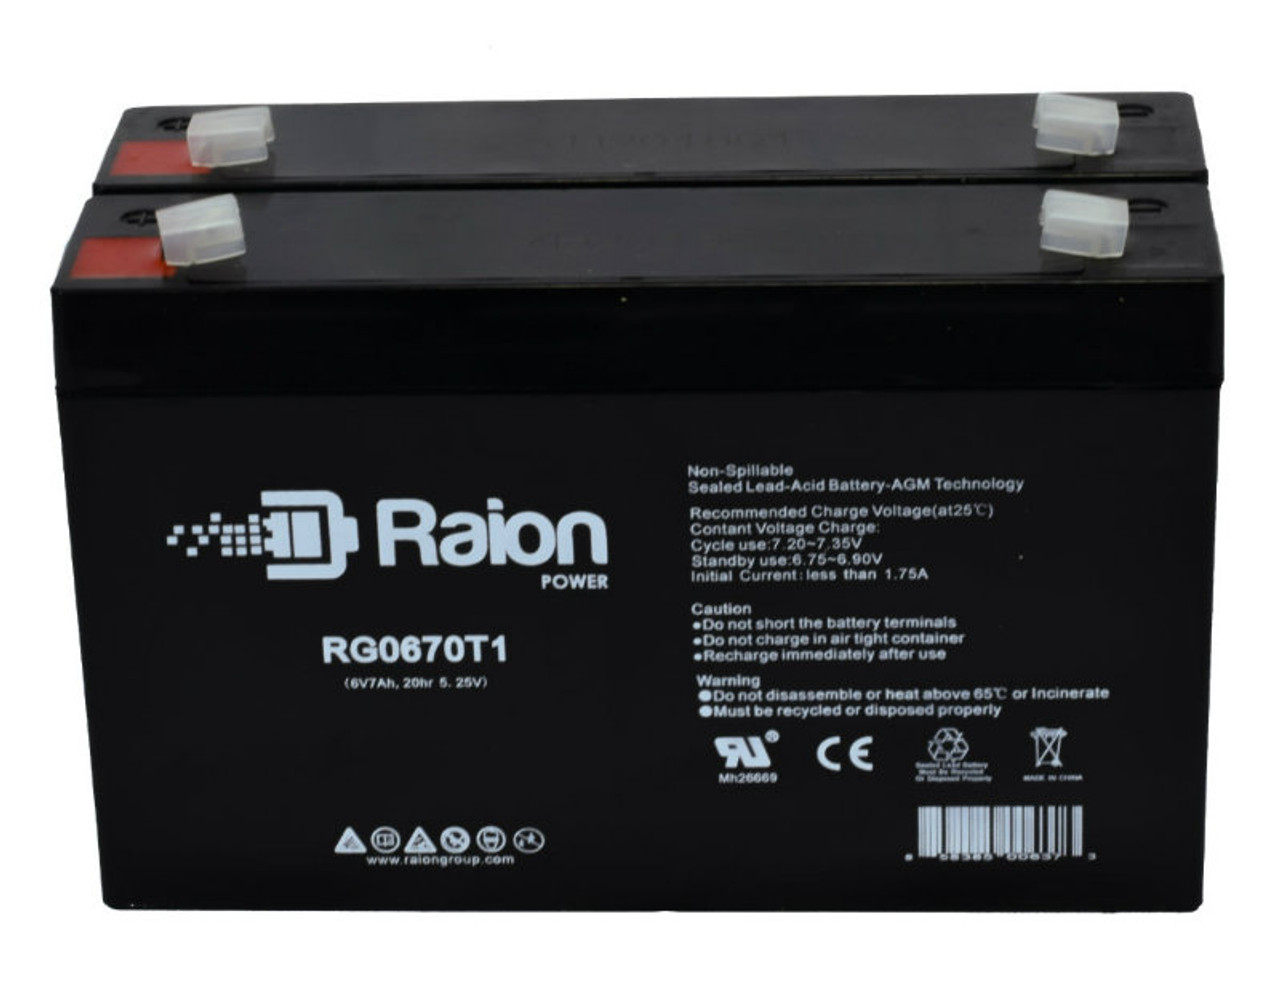 Raion Power 6V 7Ah Replacement Ride-On Toy Battery Cartridge for Costzon 12V Ride On Truck, Parental Remote Control - 2 Pack